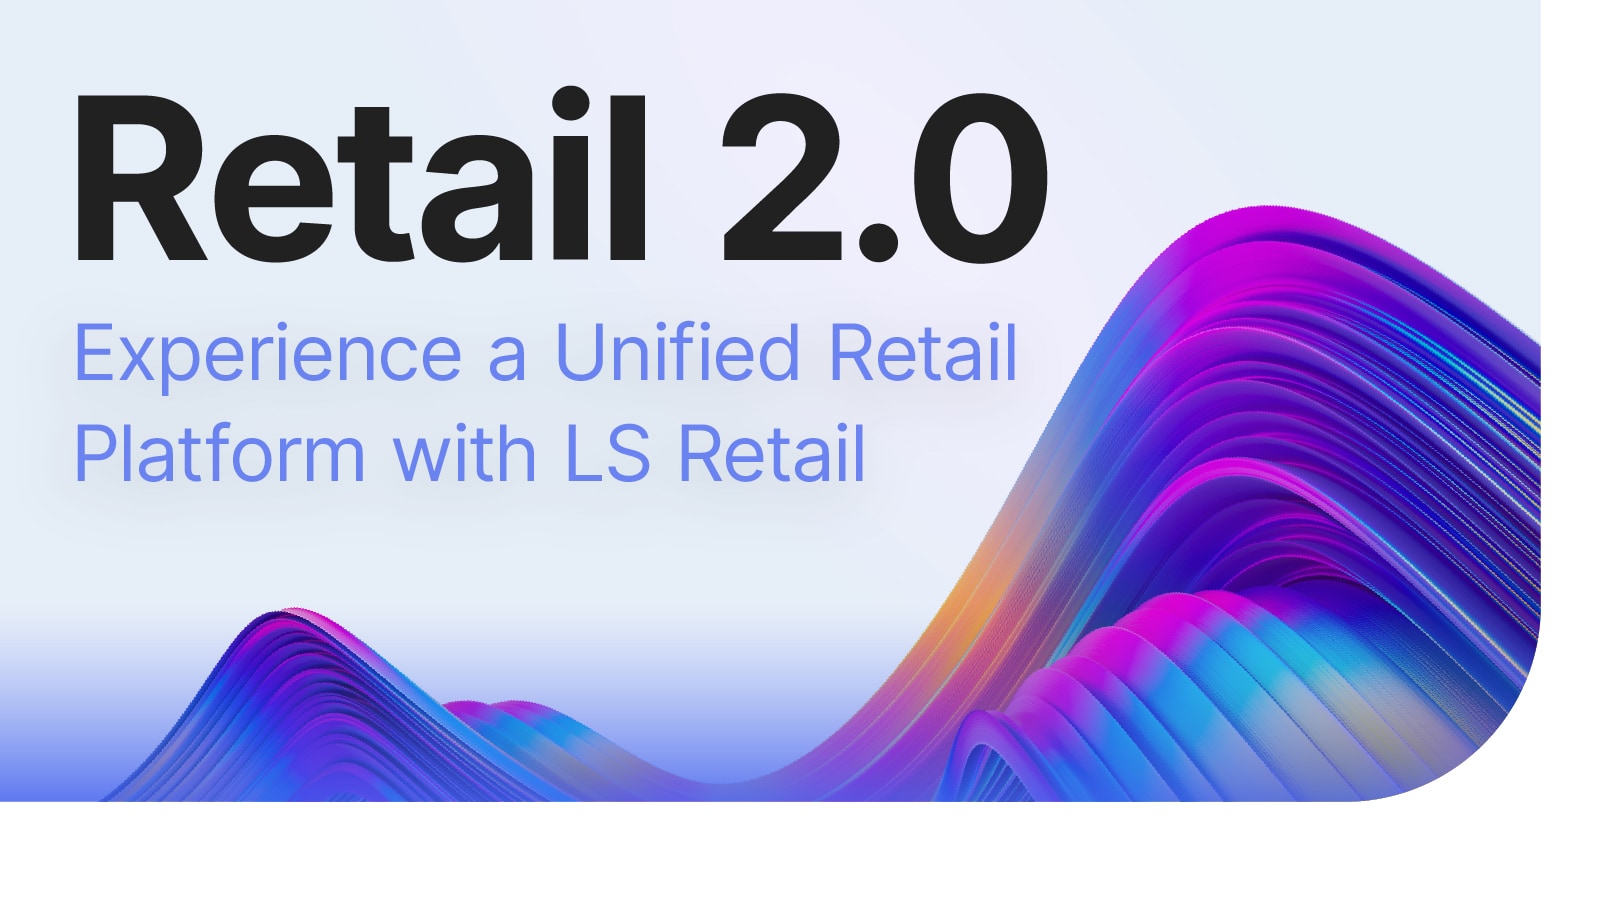 Retail 2.0 – Experience a Unified Retail Platform with LS Retail